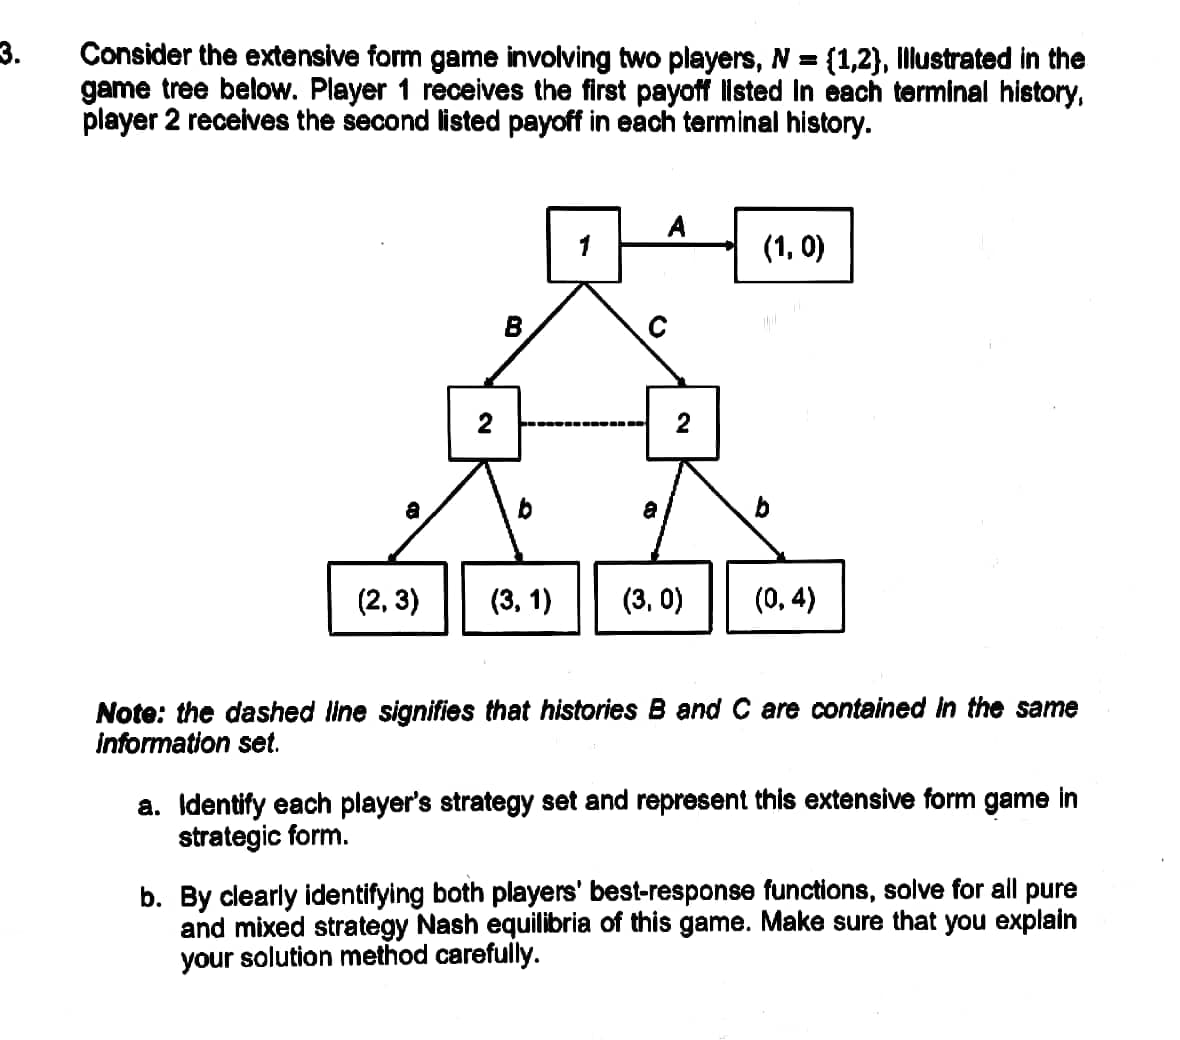 3.
Consider the extensive form game involving two players, N = {1,2}, Illustrated in the
game tree below. Player 1 receives the first payoff listed In each terminal history,
player 2 receives the second listed payoff in each terminal history.
a
(2,3)
B
1
a
A
2
(1,0)
(3, 1) (3, 0) (0,4)
Note: the dashed line signifies that histories B and C are contained in the same
information set.
a. Identify each player's strategy set and represent this extensive form game in
strategic form.
b. By clearly identifying both players' best-response functions, solve for all pure
and mixed strategy Nash equilibria of this game. Make sure that you explain
your solution method carefully.